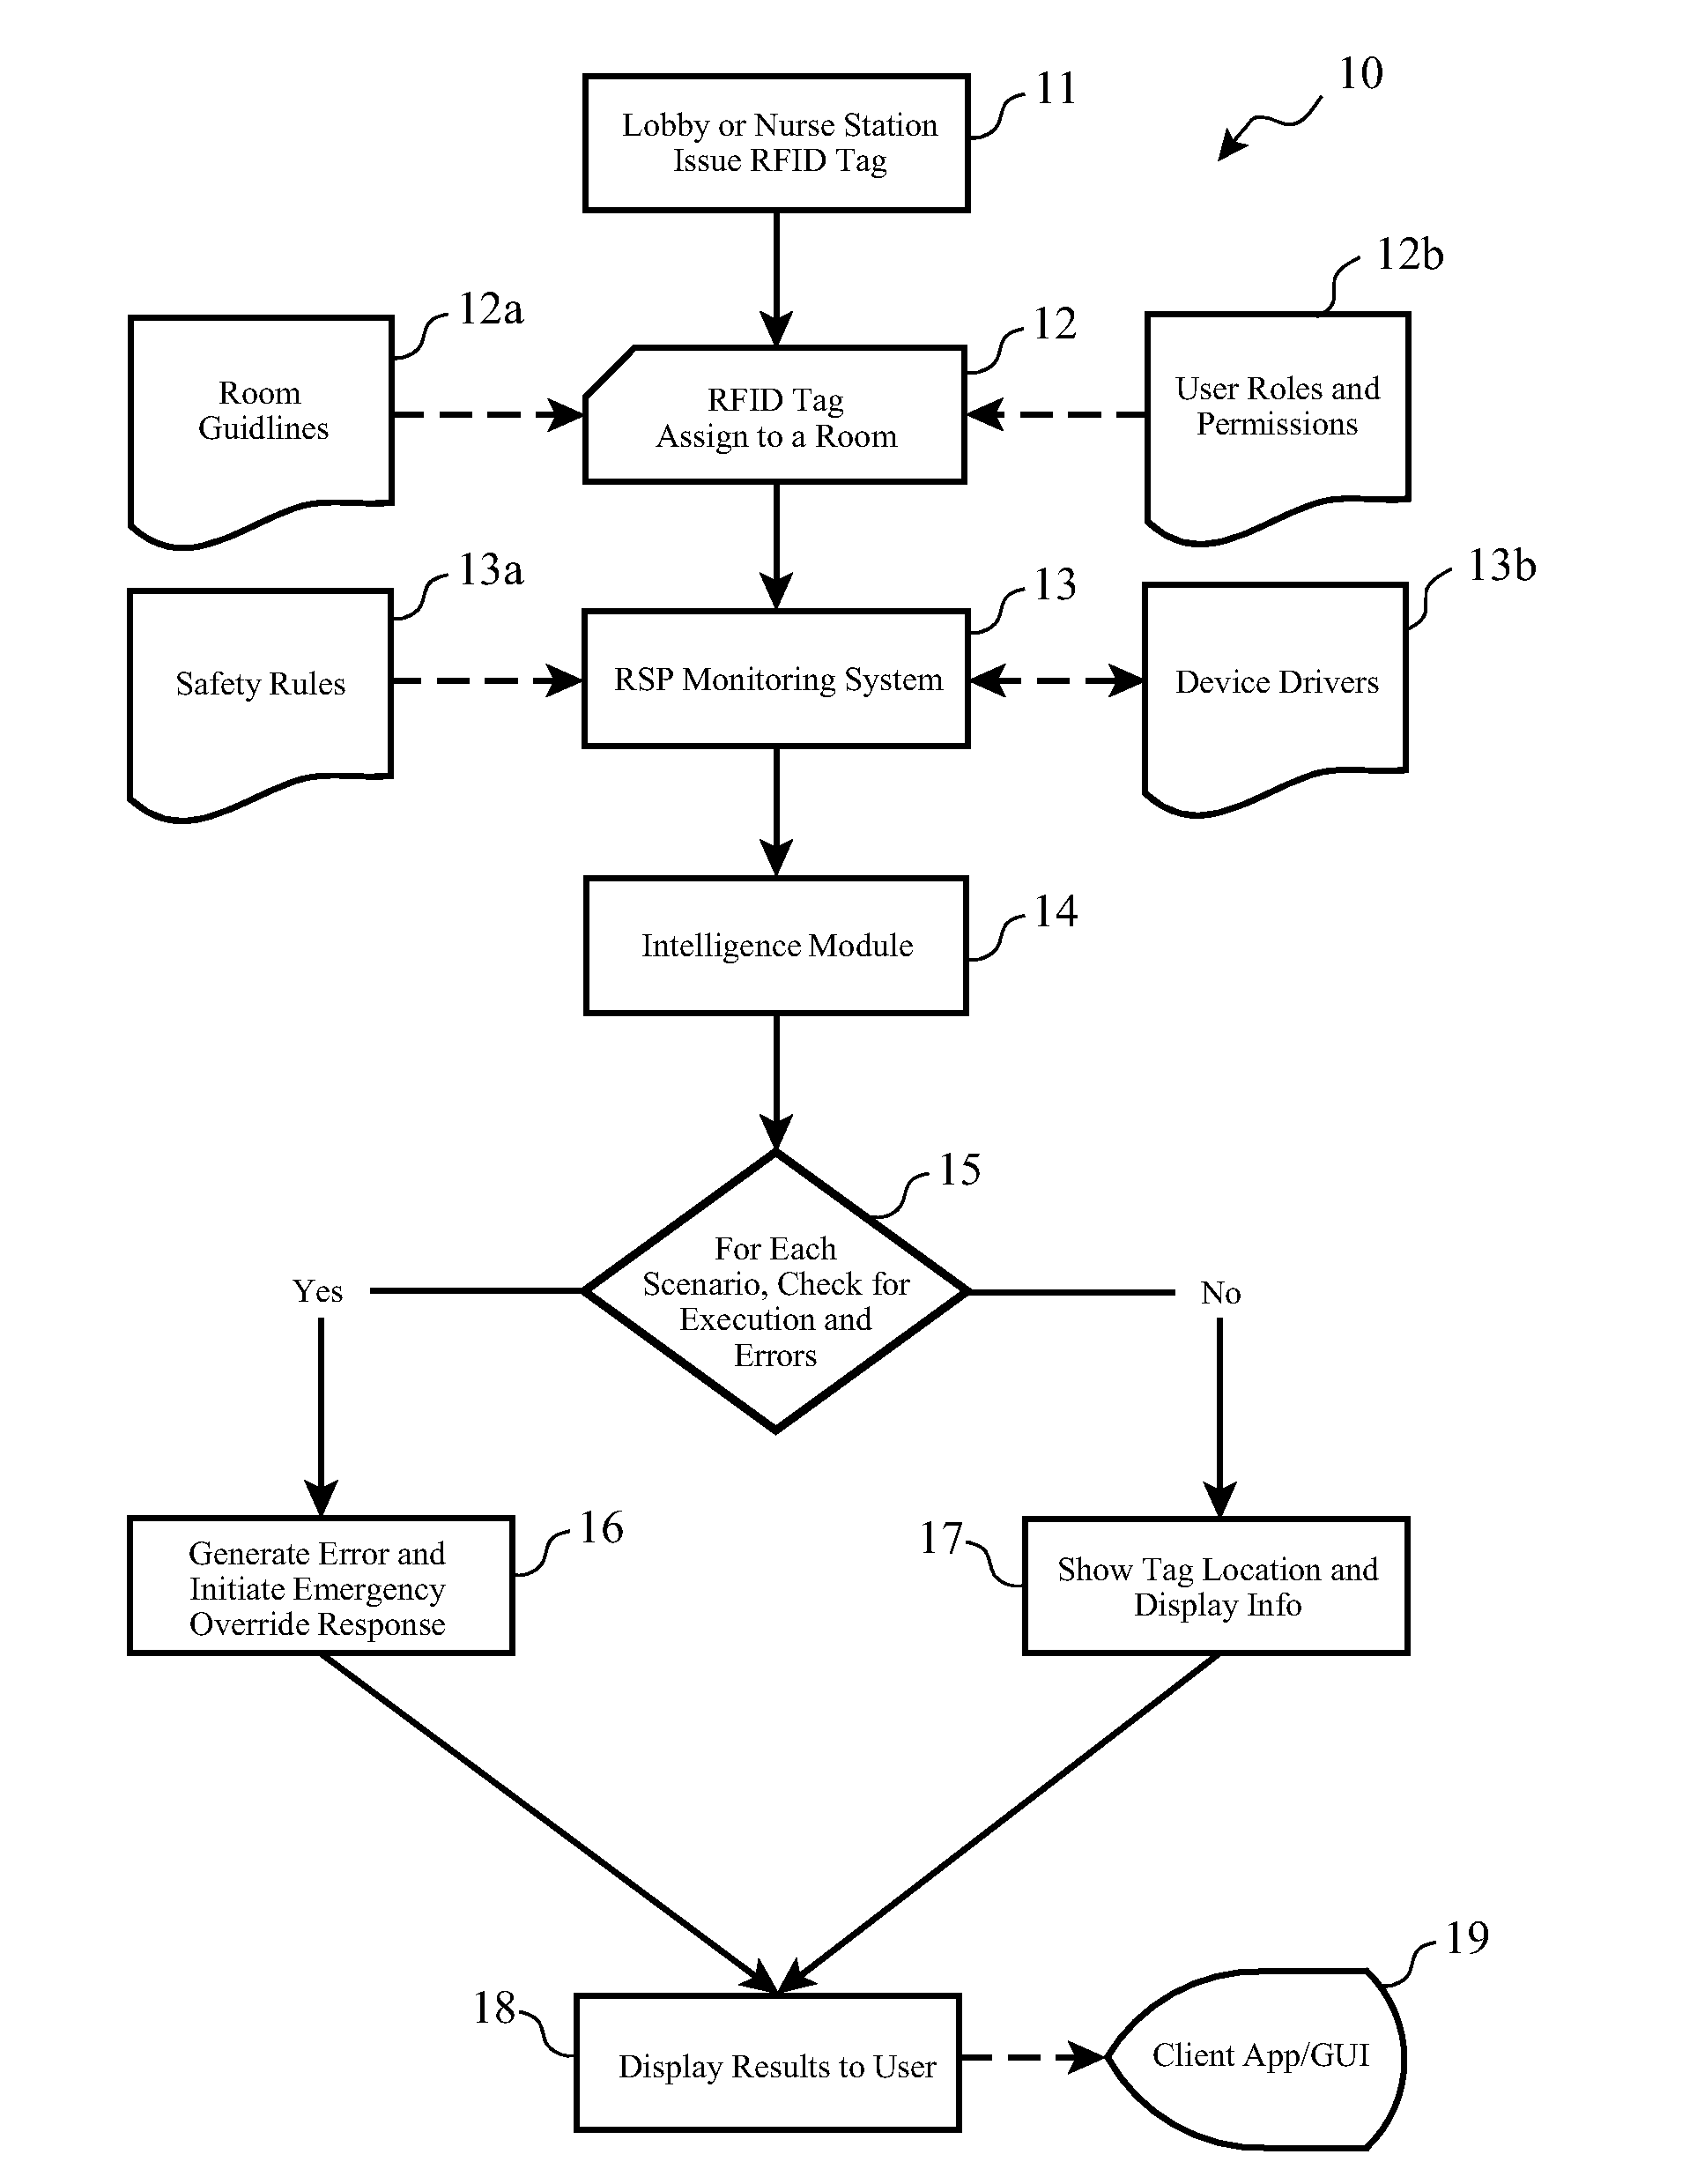 System and method for controlling, configuring, and disabling devices in a healthcare system